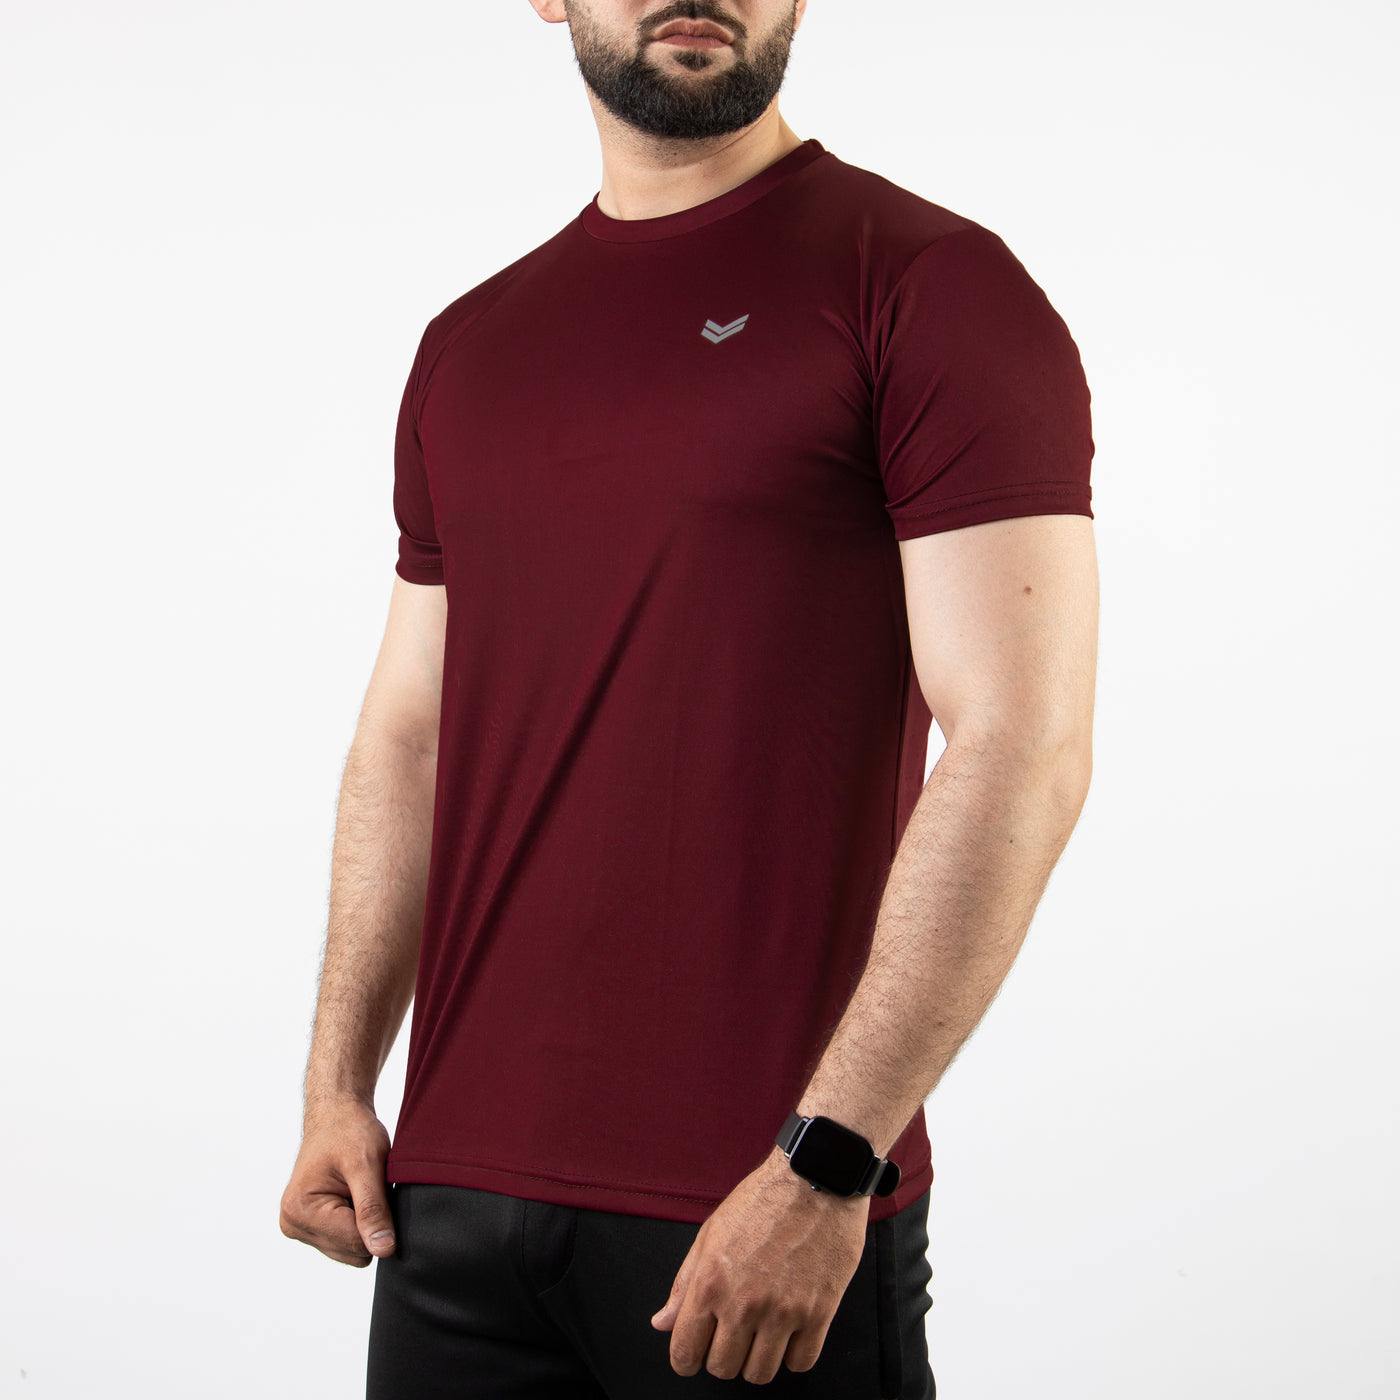 Plain Maroon Quick Dry T-Shirt with Reflective Logo